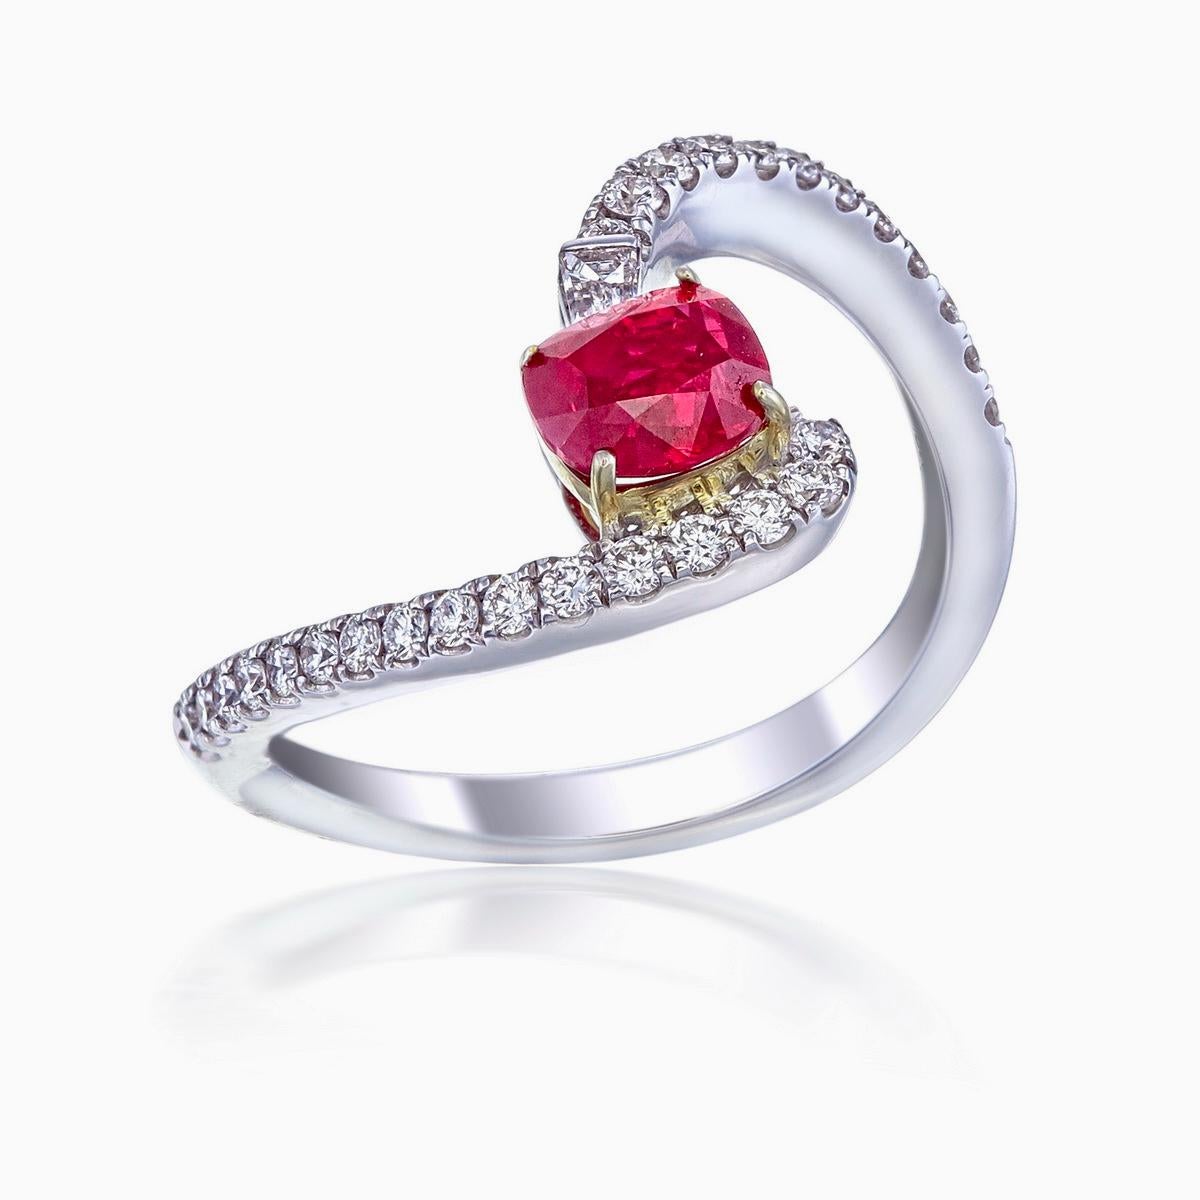 Introducing the exquisite Ruby and Diamond Ring by Rewa, a modern masterpiece that artfully blends contemporary design with timeless elegance. Inspired by nature's breathtaking beauty, this ring boasts a captivating 0.95 carat cushion-cut Burmese